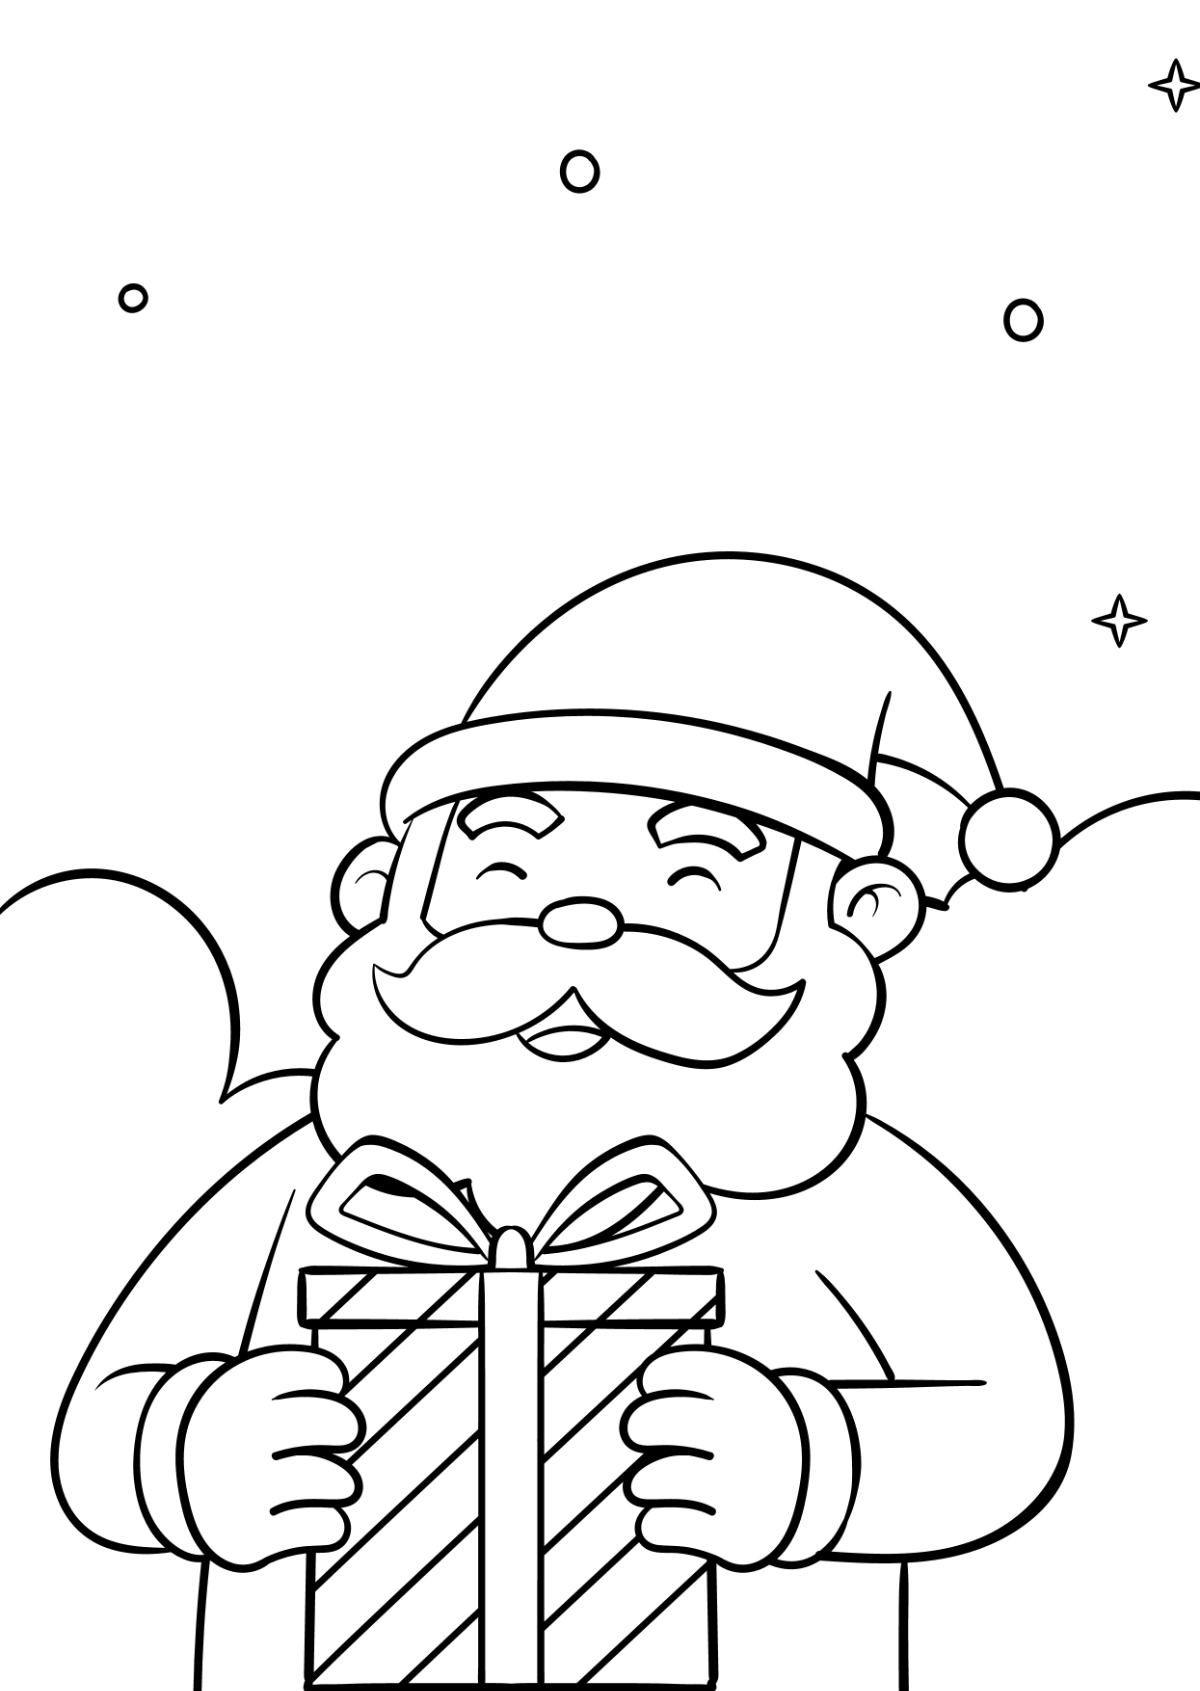 FREE Christmas Drawing Templates Examples Edit Online Download